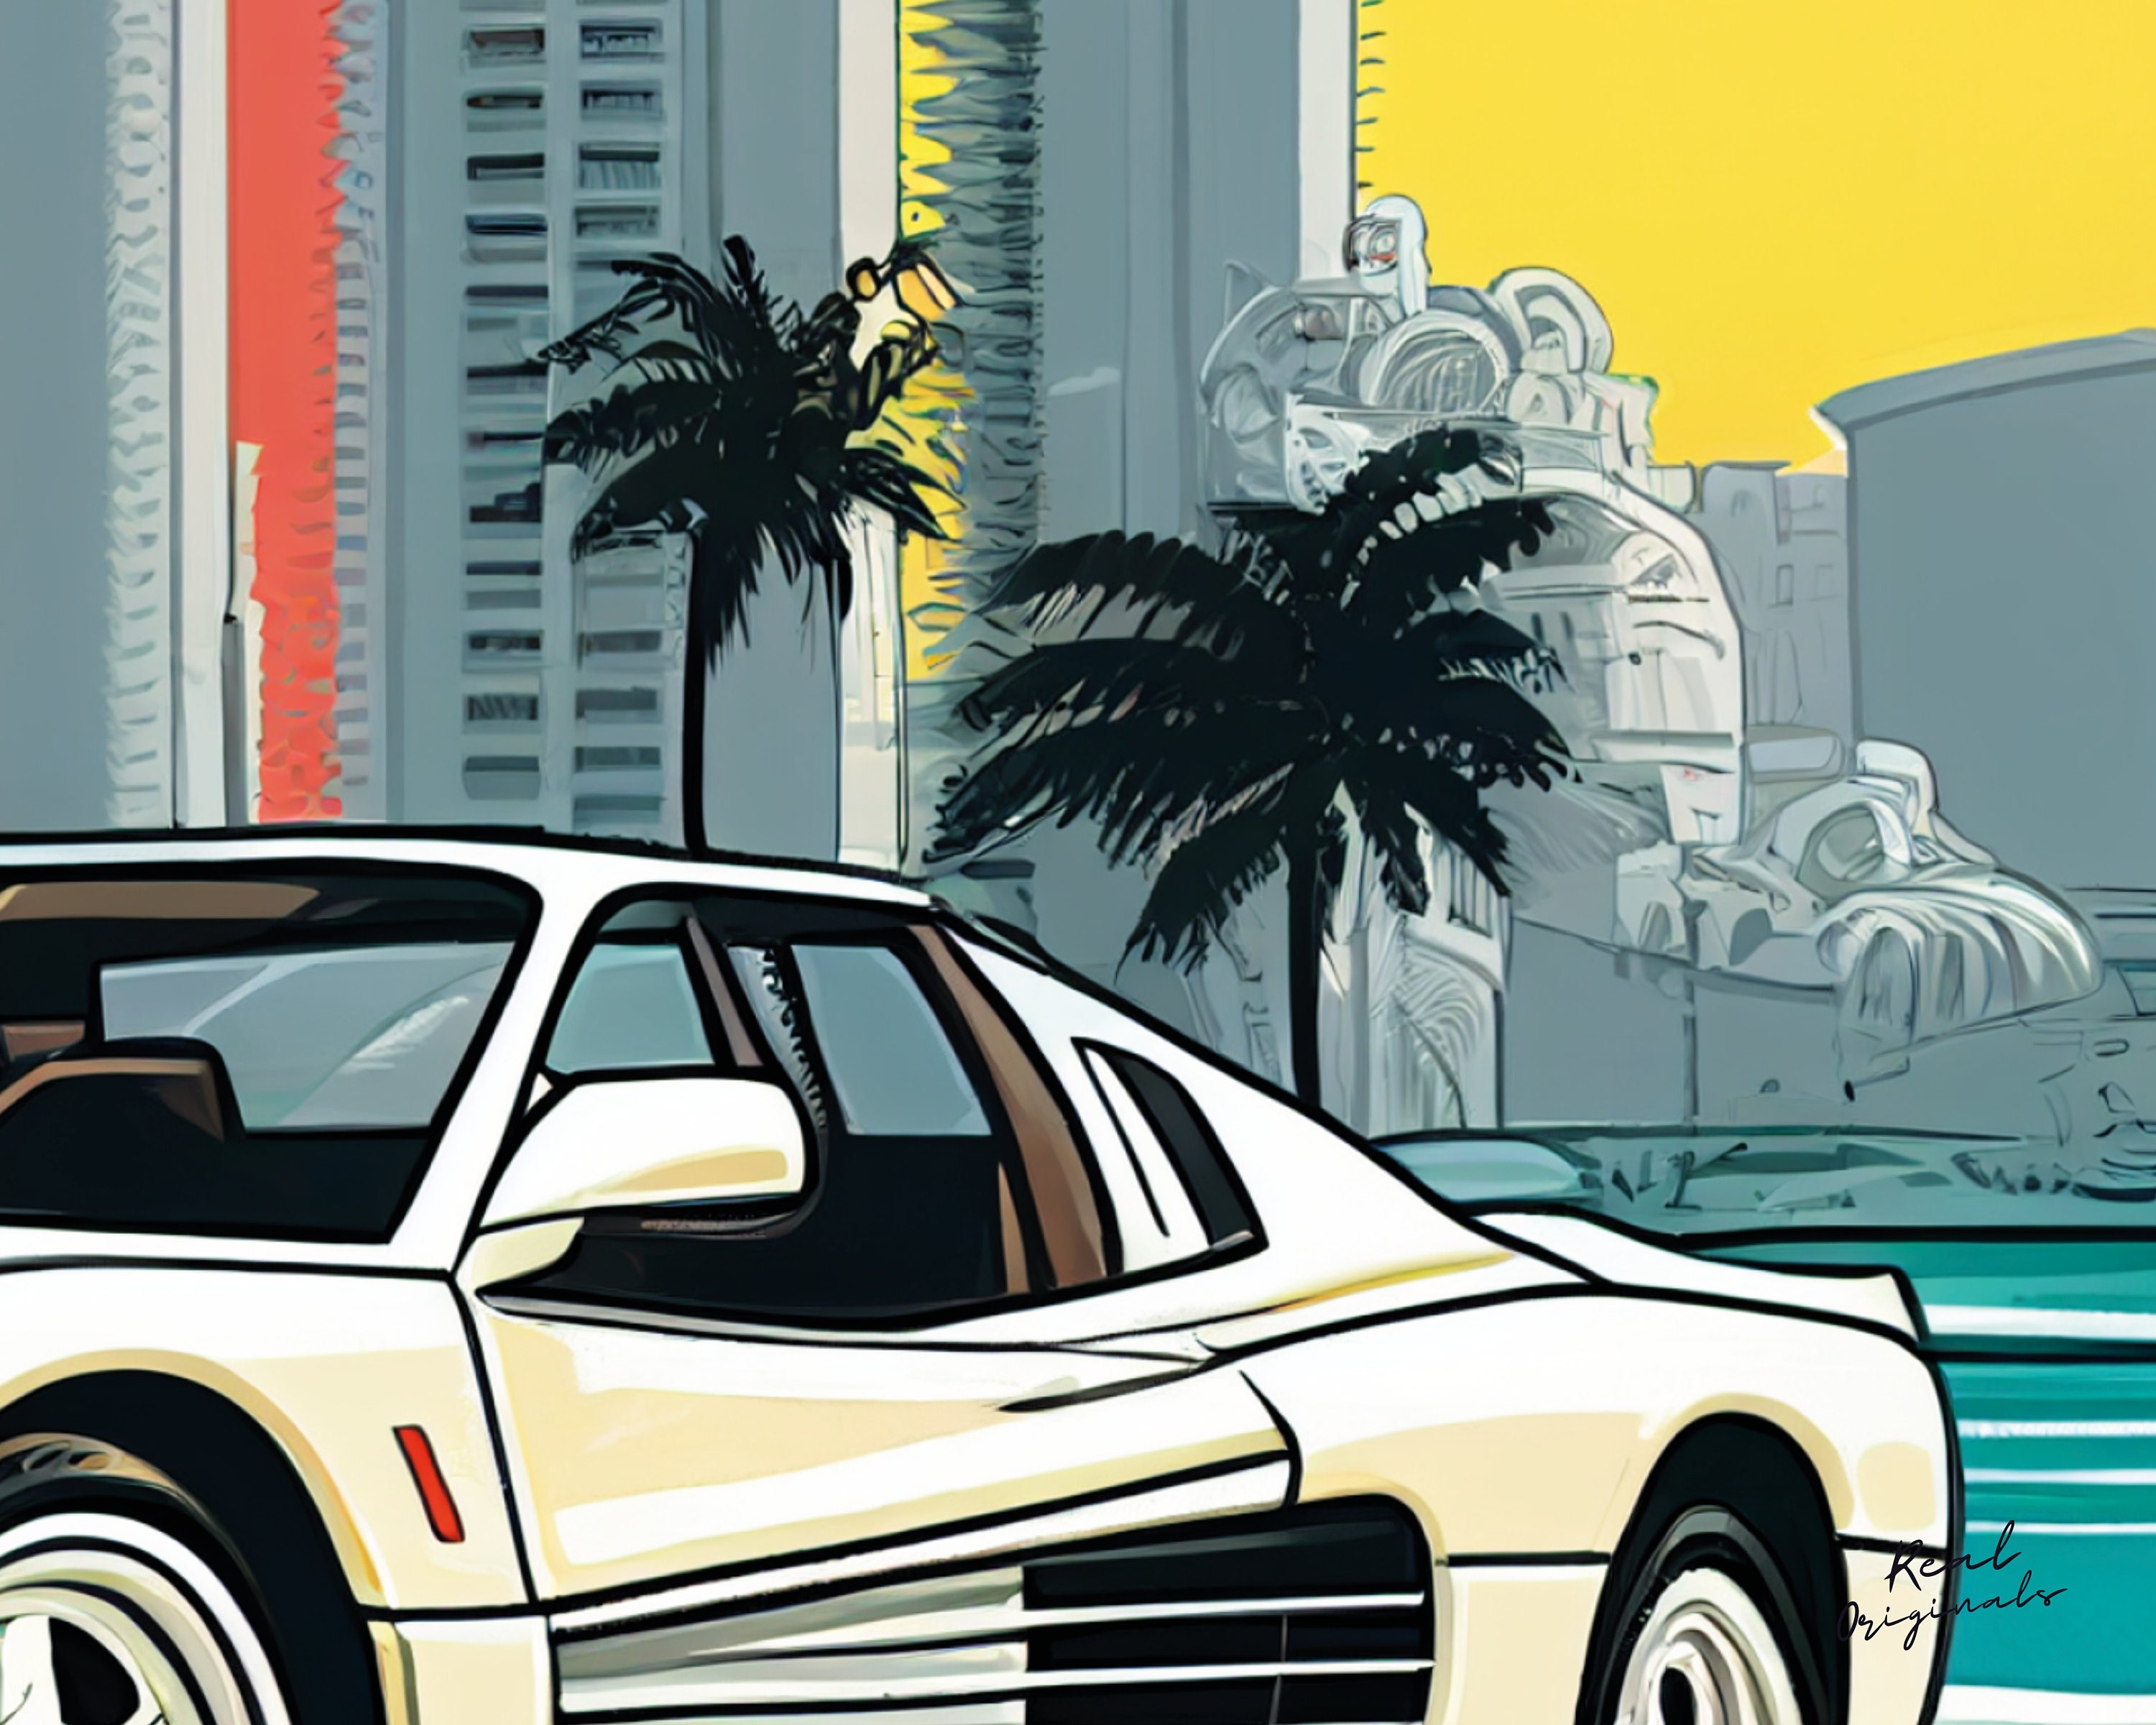 Ferrari Testarossa from Miami Vice Poster for Sale by car2oonz